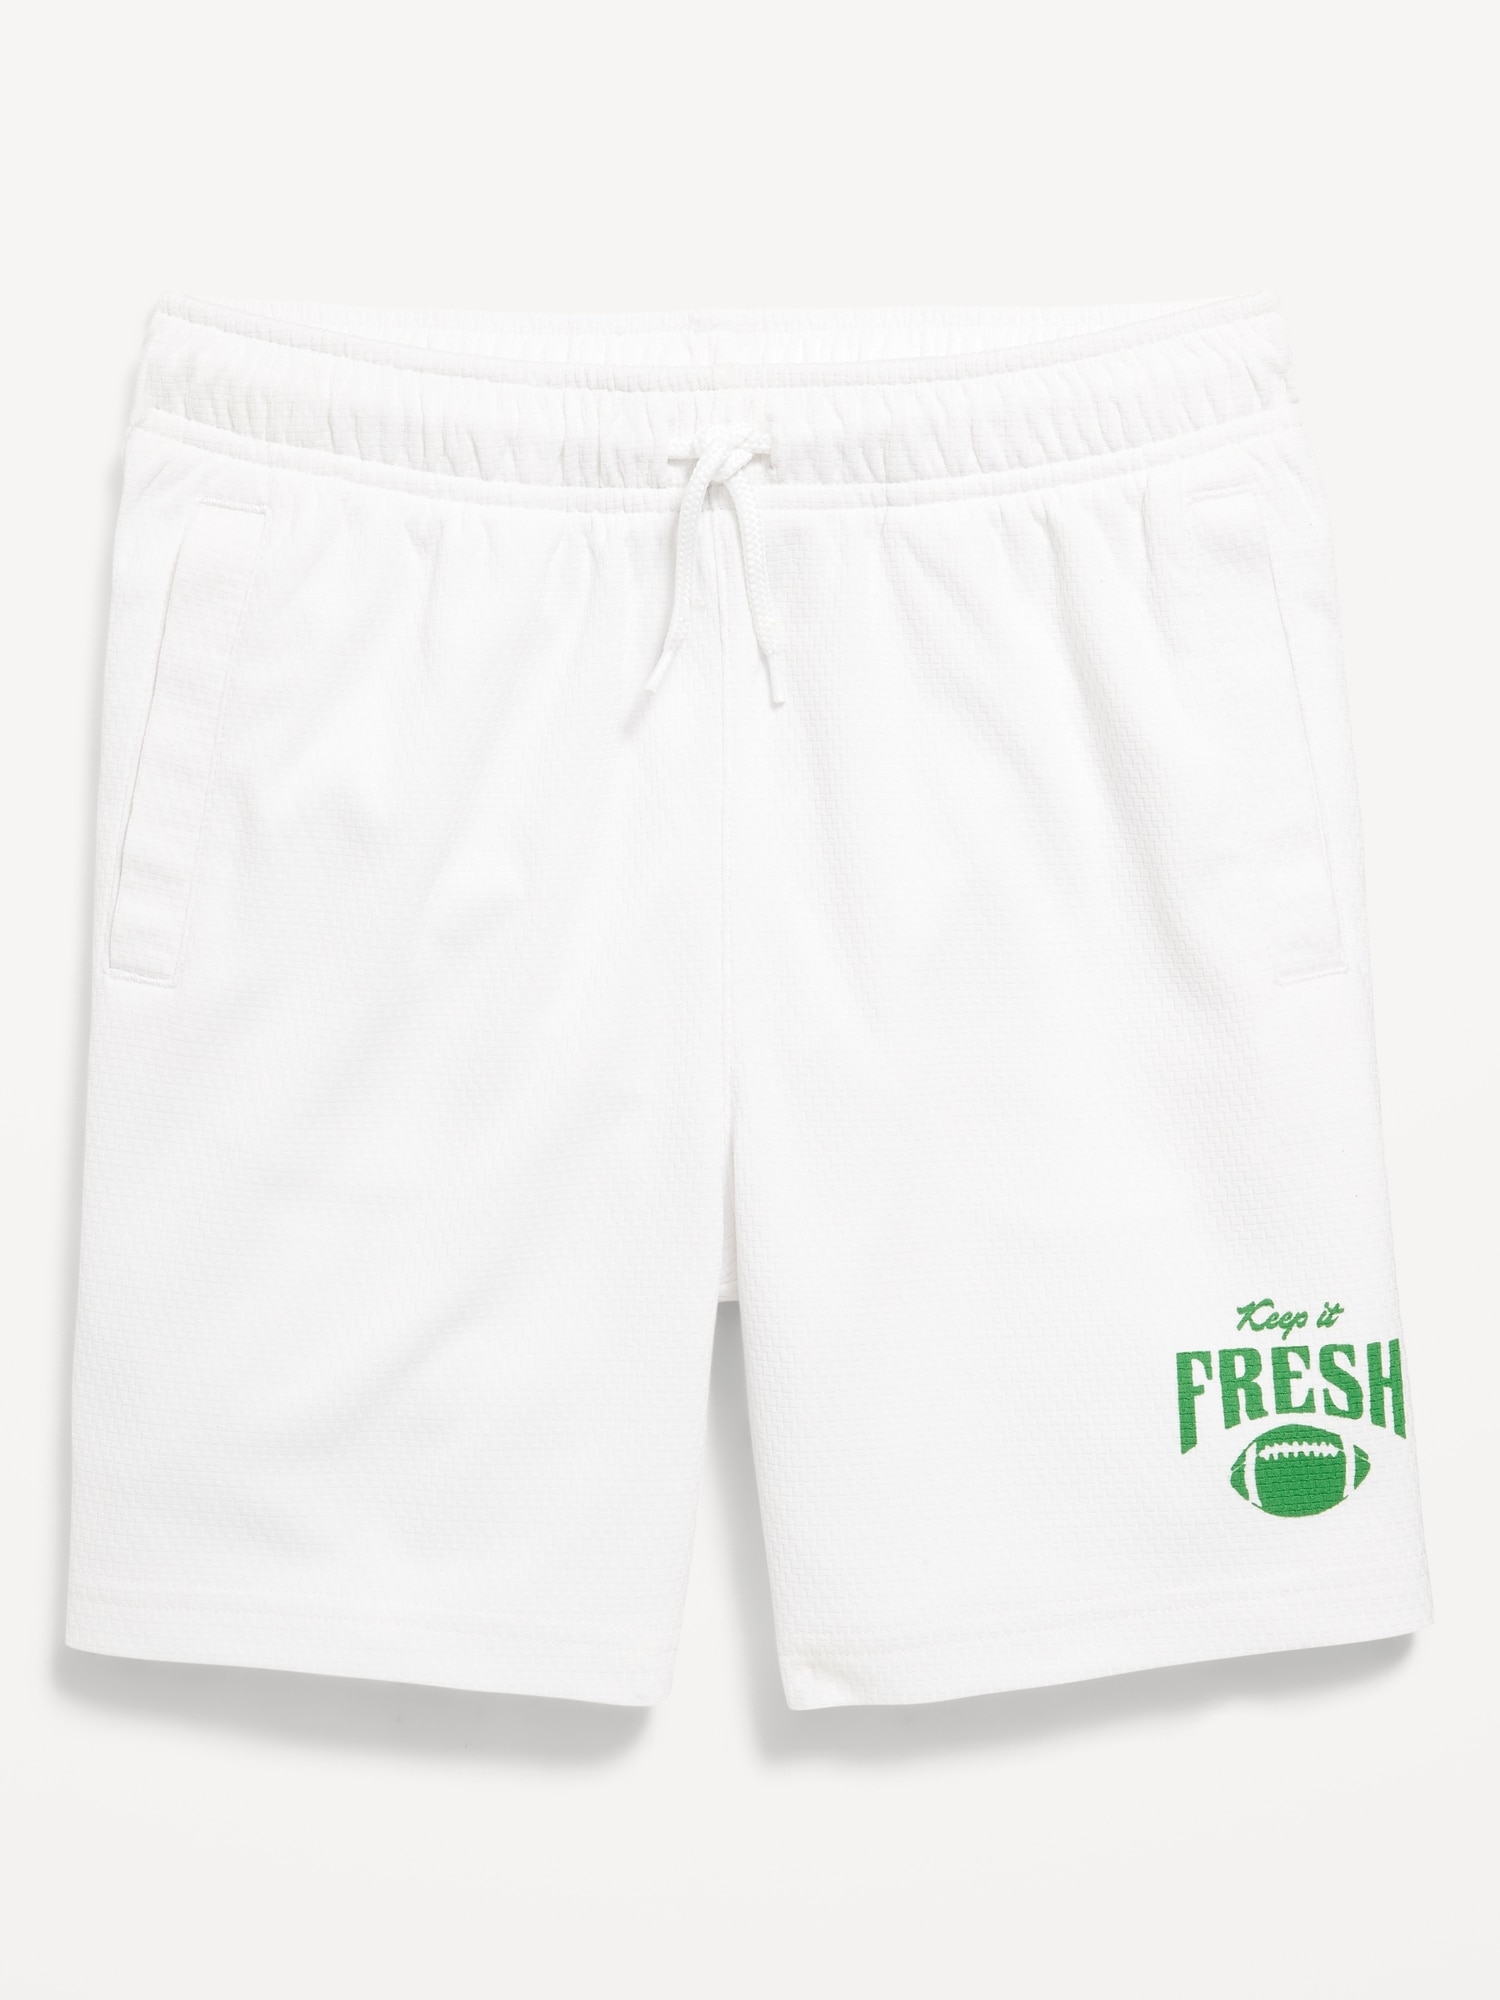 Mesh Performance Shorts for Boys (Above Knee)